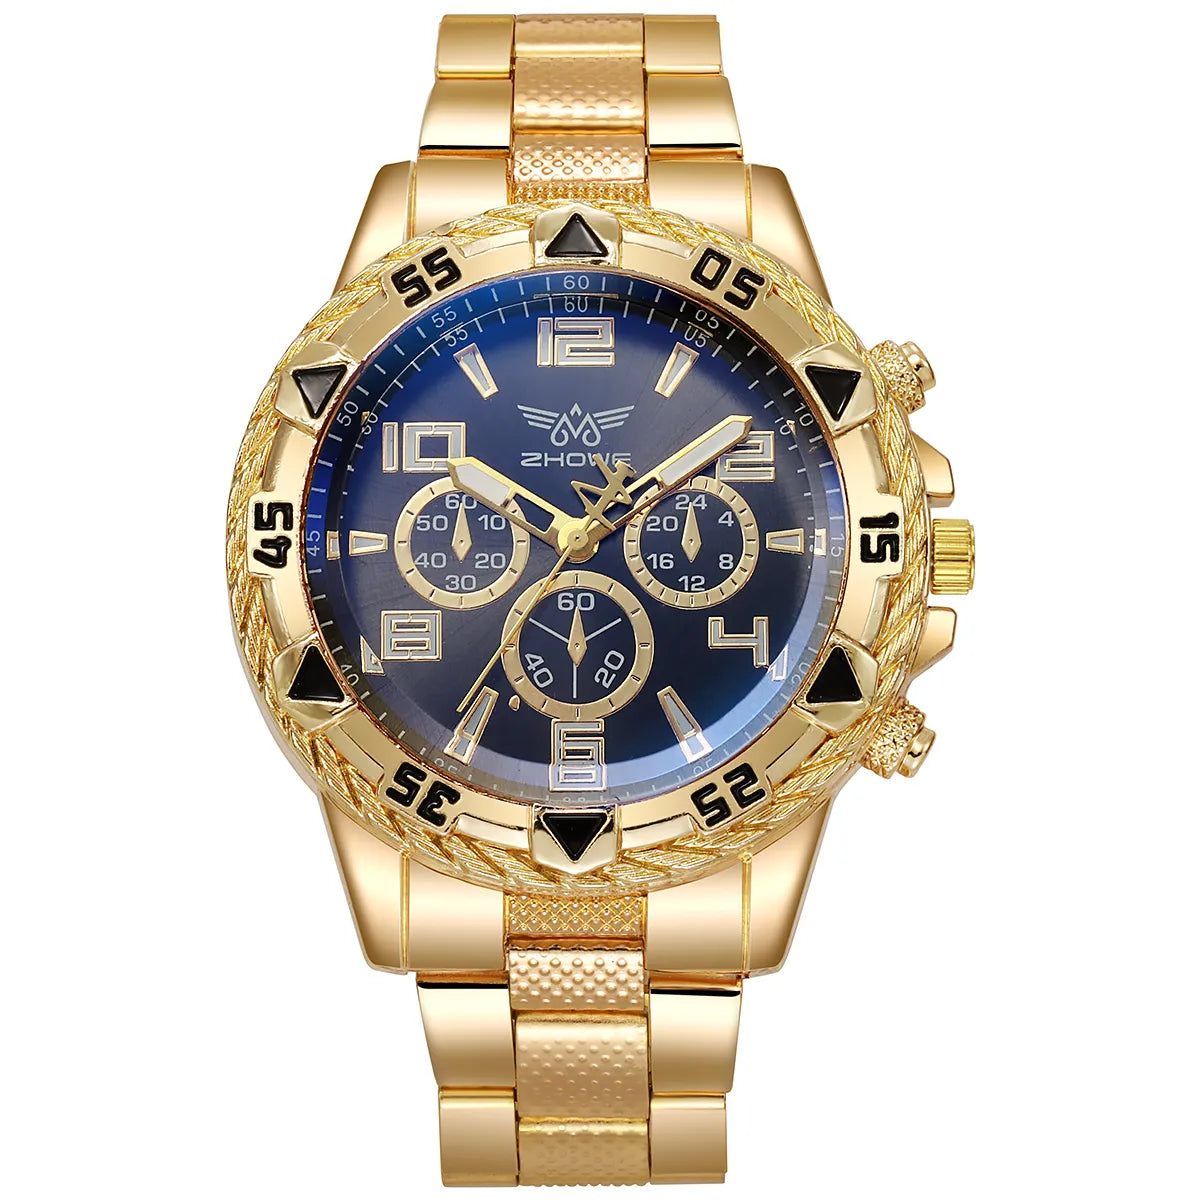 Men's Business Fashion Watch Chunky Bezel Gold Quartz With Stainless Steel Band - Bonnie Lassio